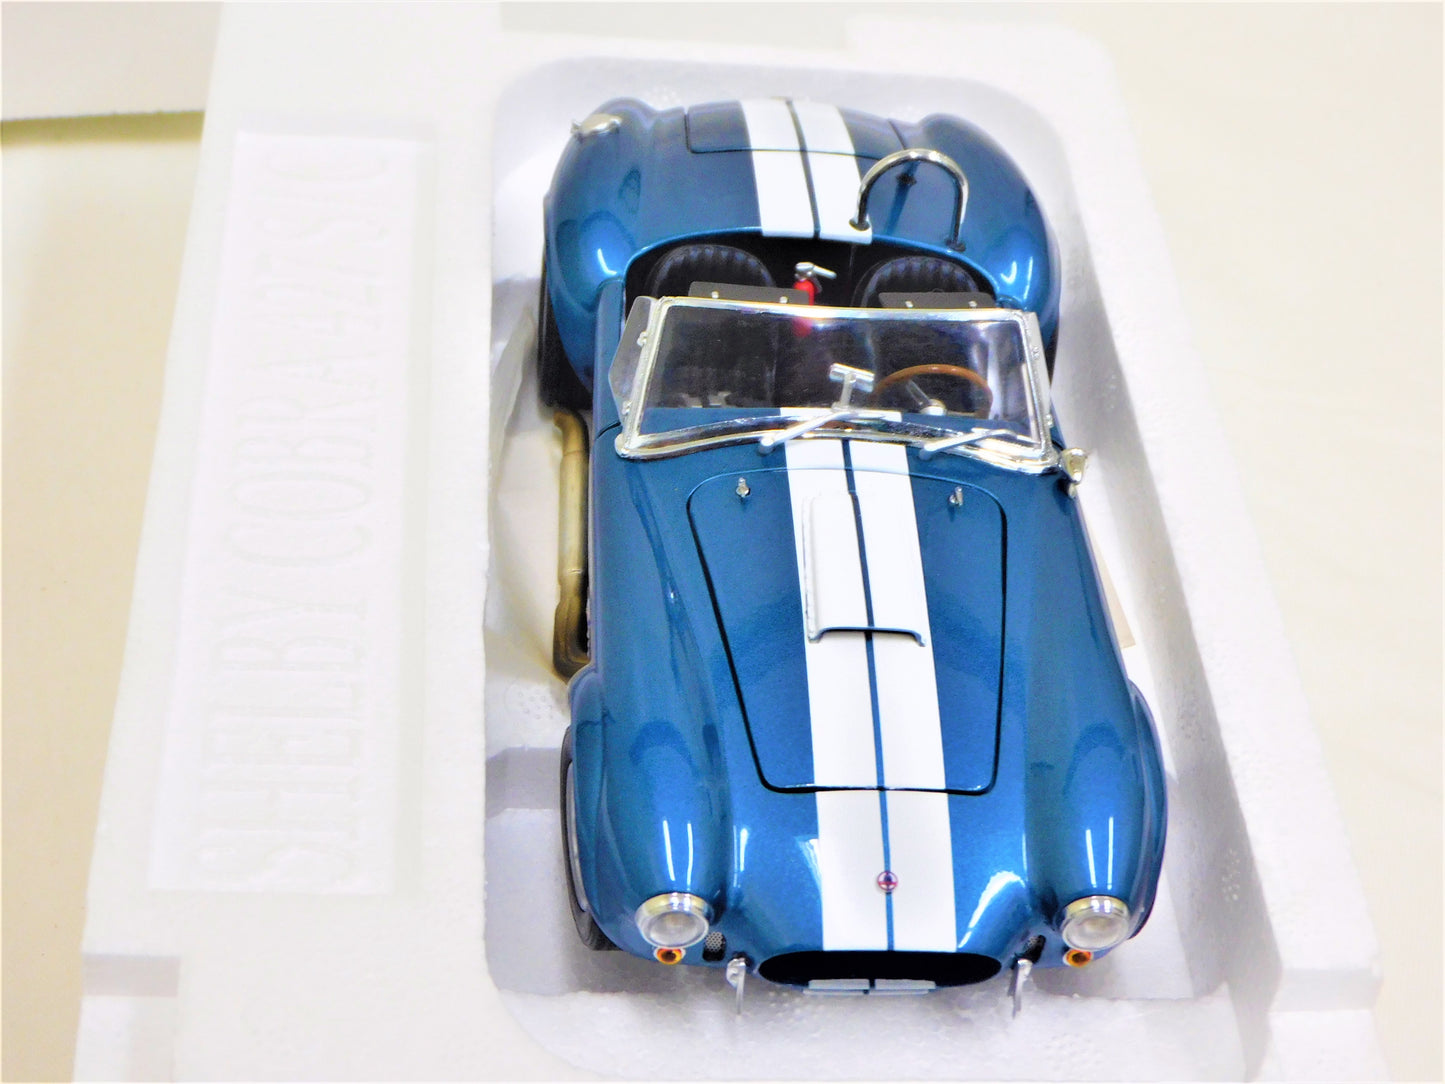 WIX 1965 Blue Shelby Cobra 1/24 Die Cast *Price Includes Tax and Shipping within the US*